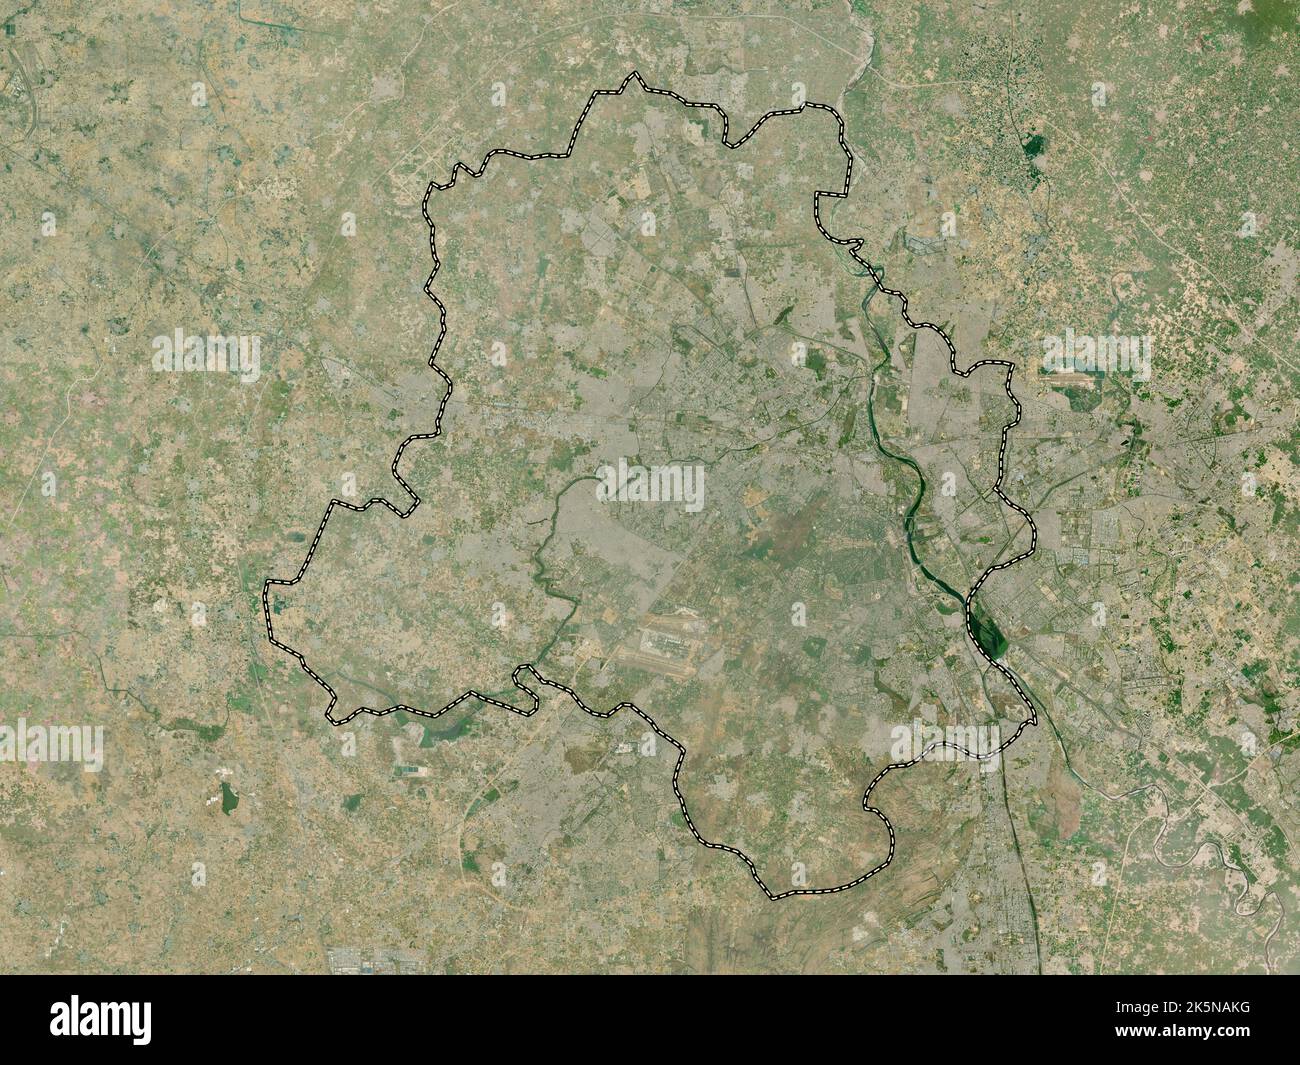 National Capital Territory of Delhi, union territory of India. High resolution satellite map Stock Photo